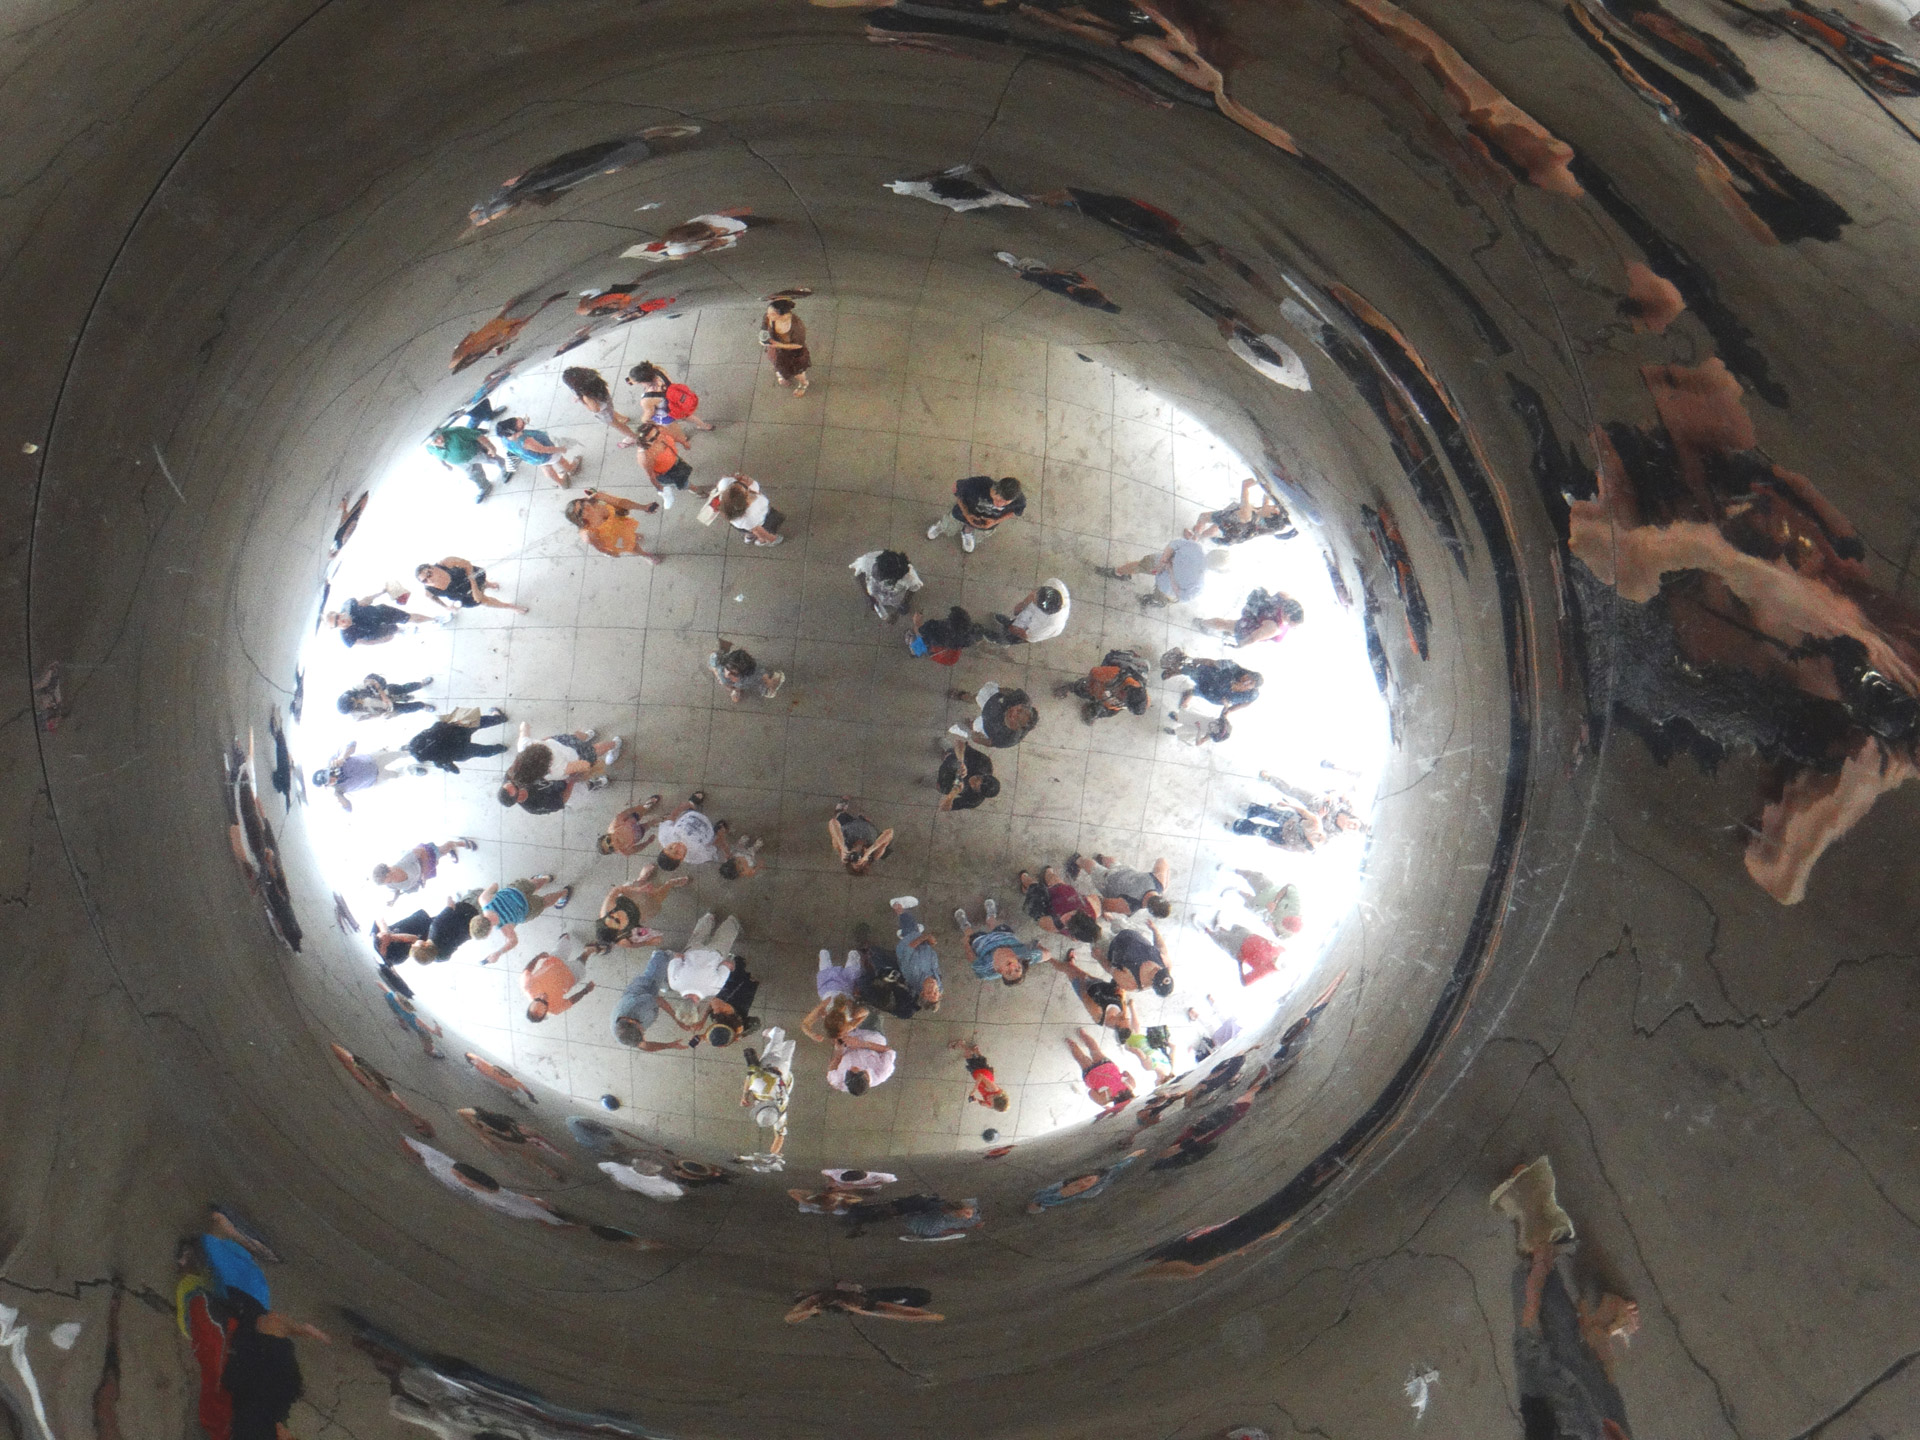 Crowd of people under reflective Bean in Chicago.